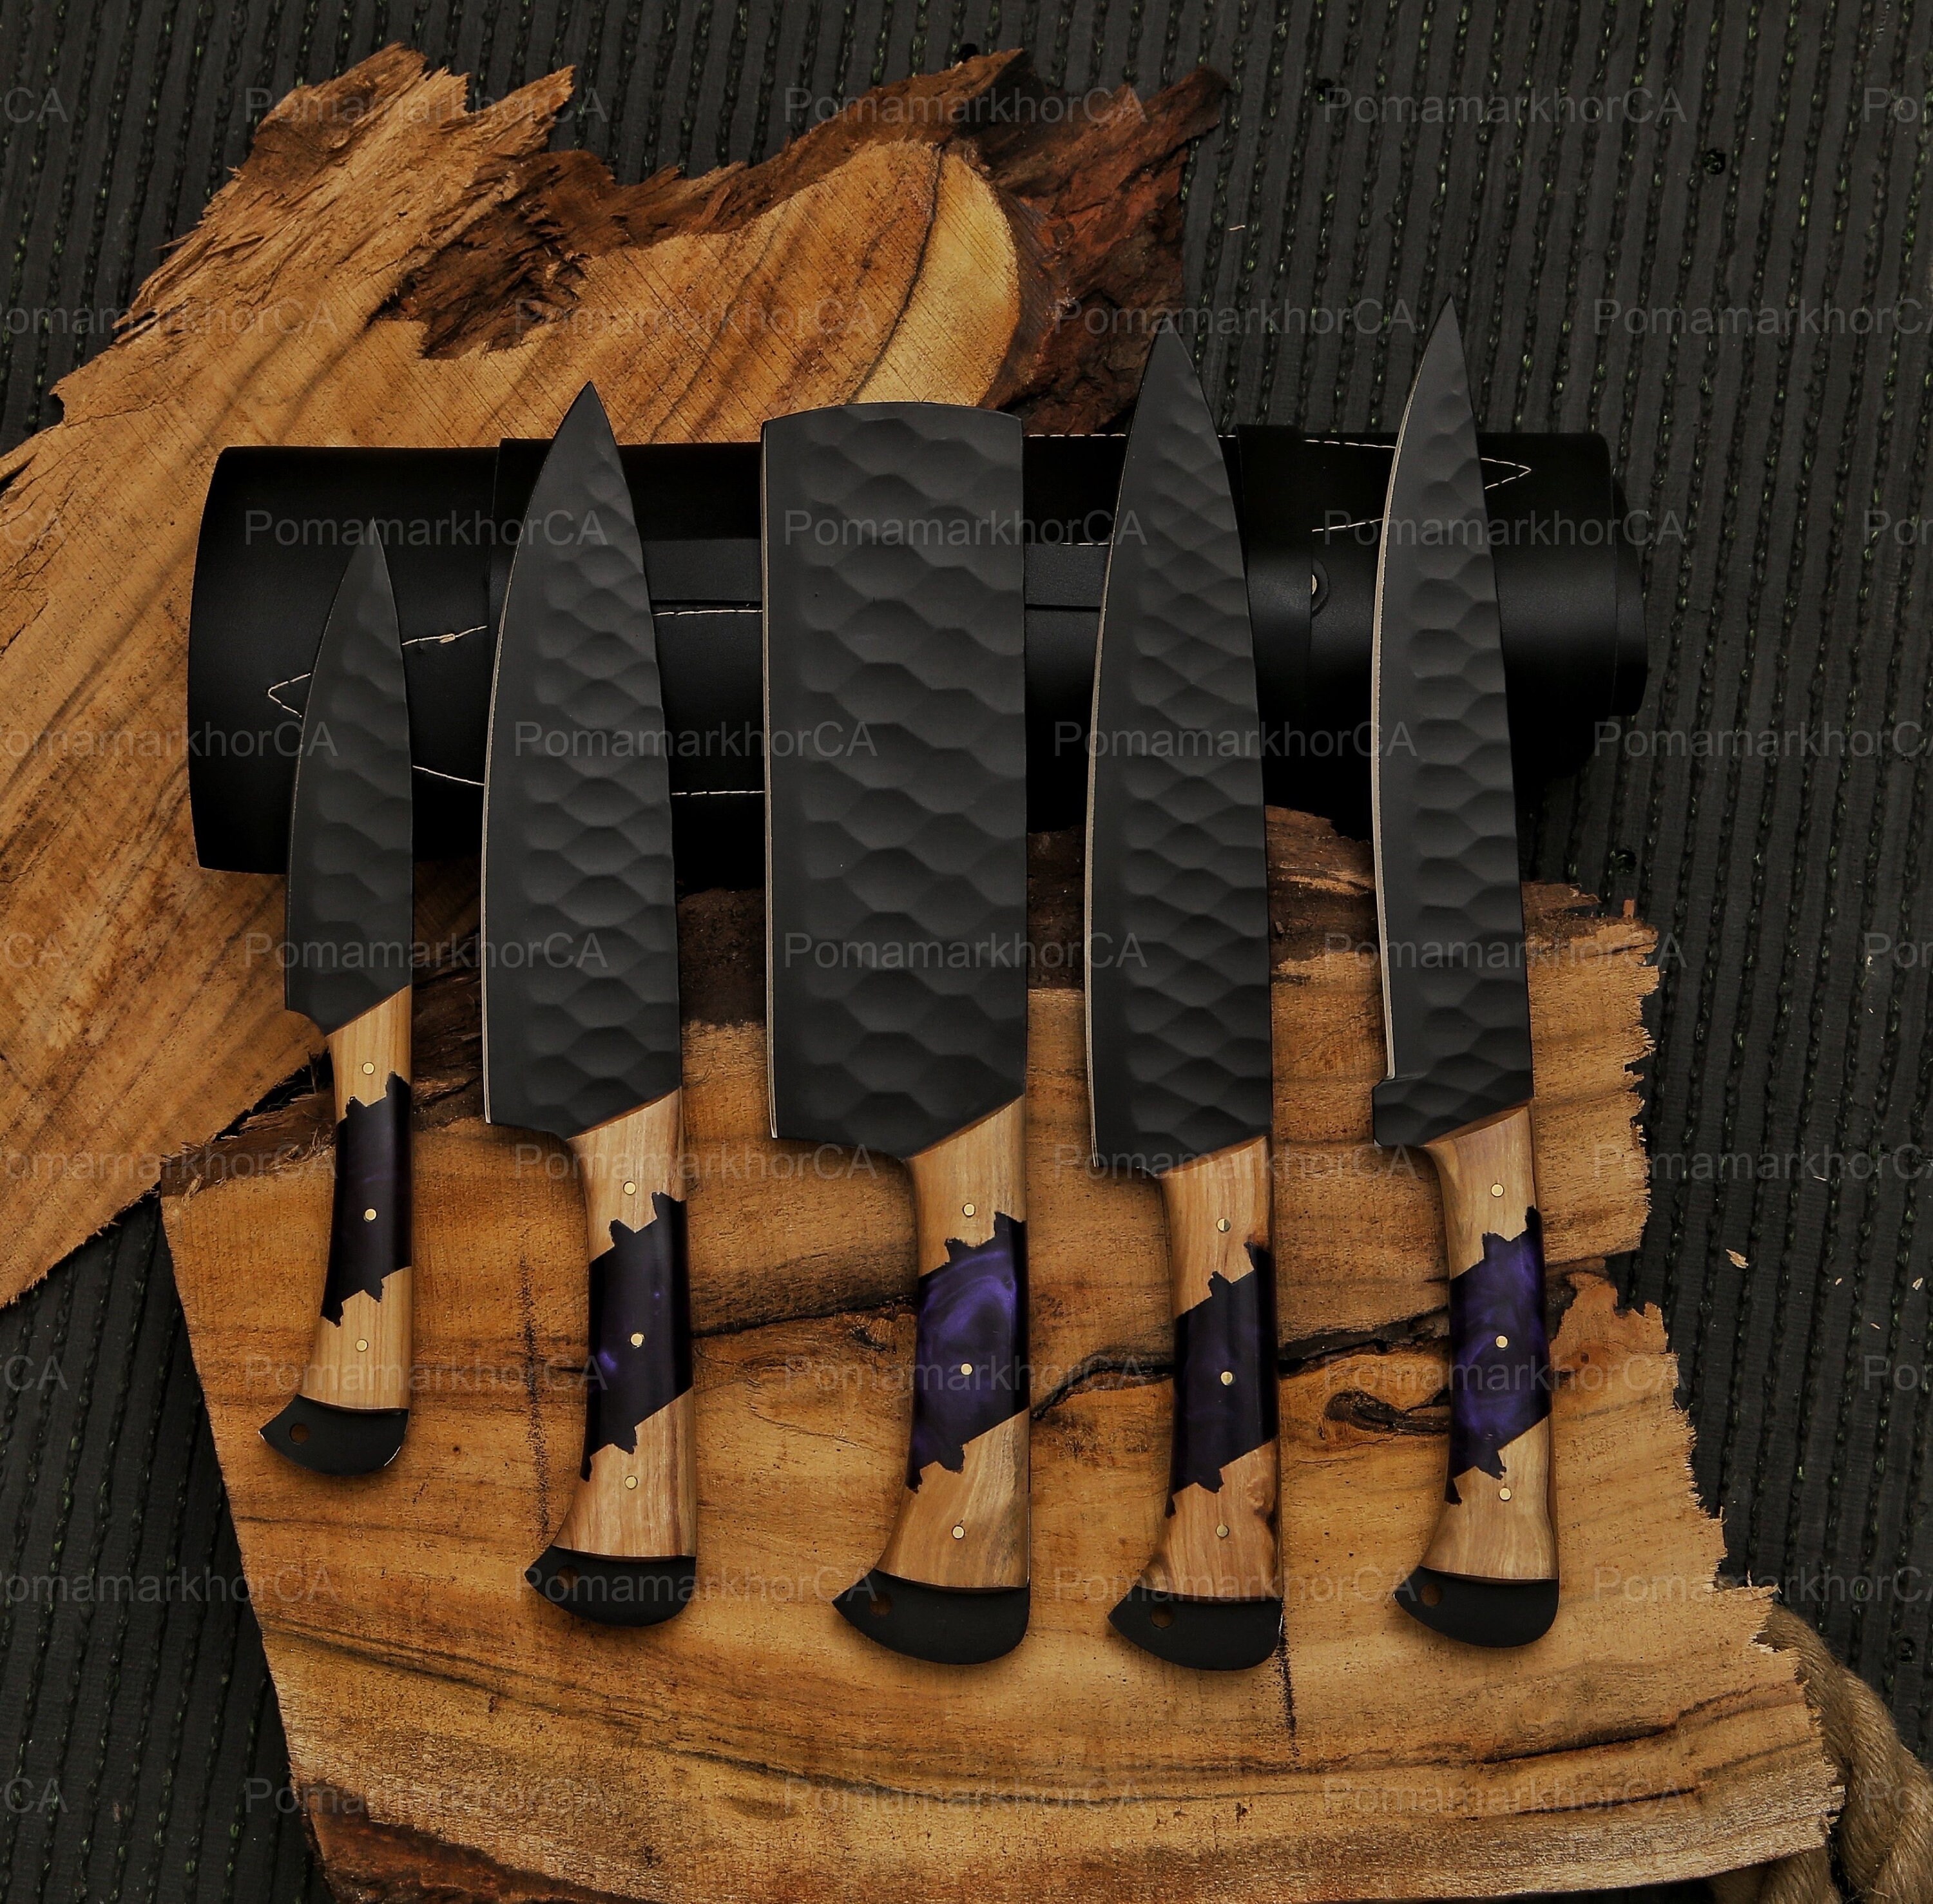 Damascus Olive Wood 3 Piece BBQ Set - Forests, Tides, and Treasures